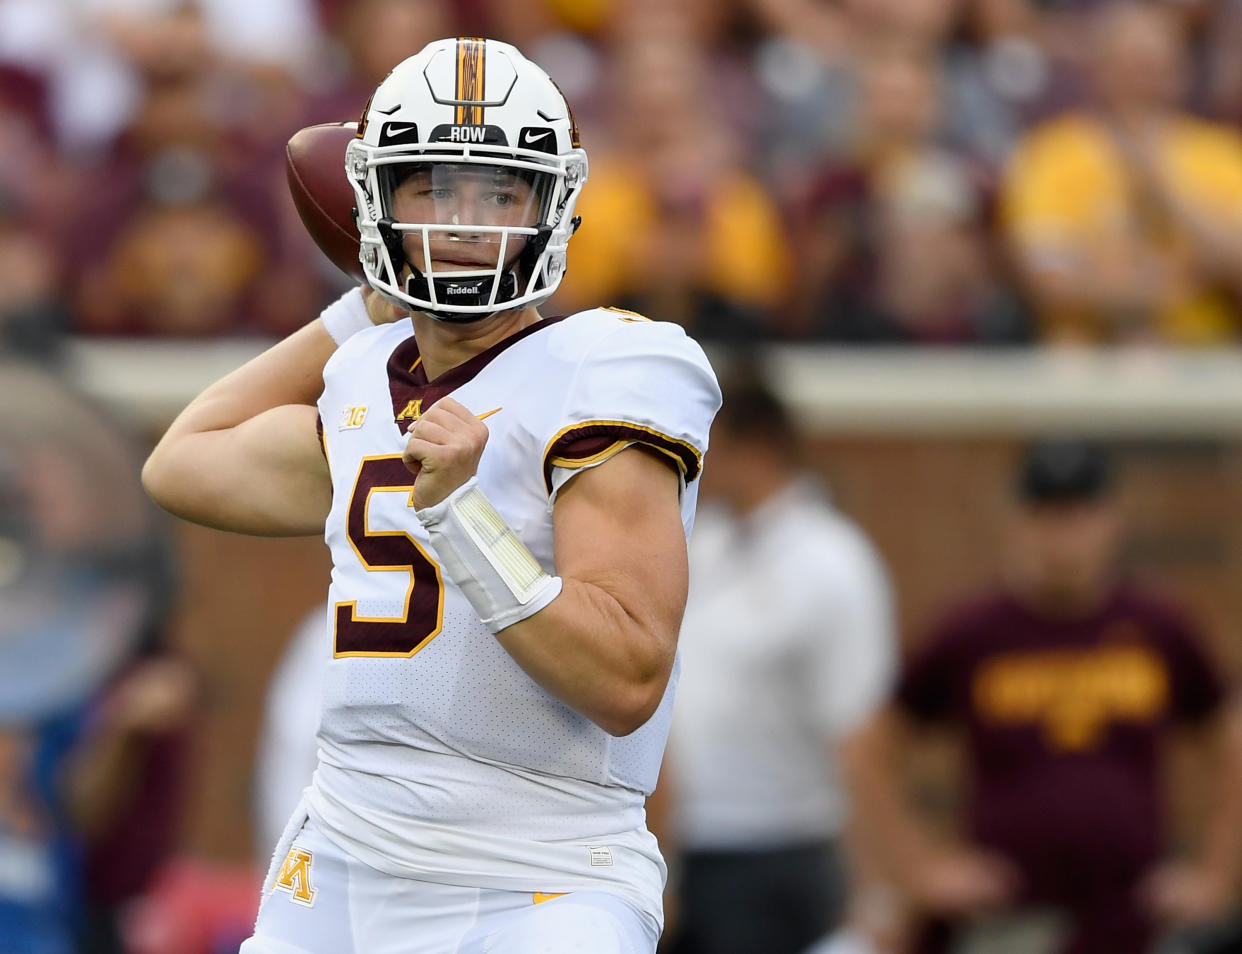 Minnesota true freshman walk-on quarterback Zack Annexstad received a call from Baker Mayfield, the only other walk-on true freshman to start at a major program, on the eve of his first game last week. (Getty Images)